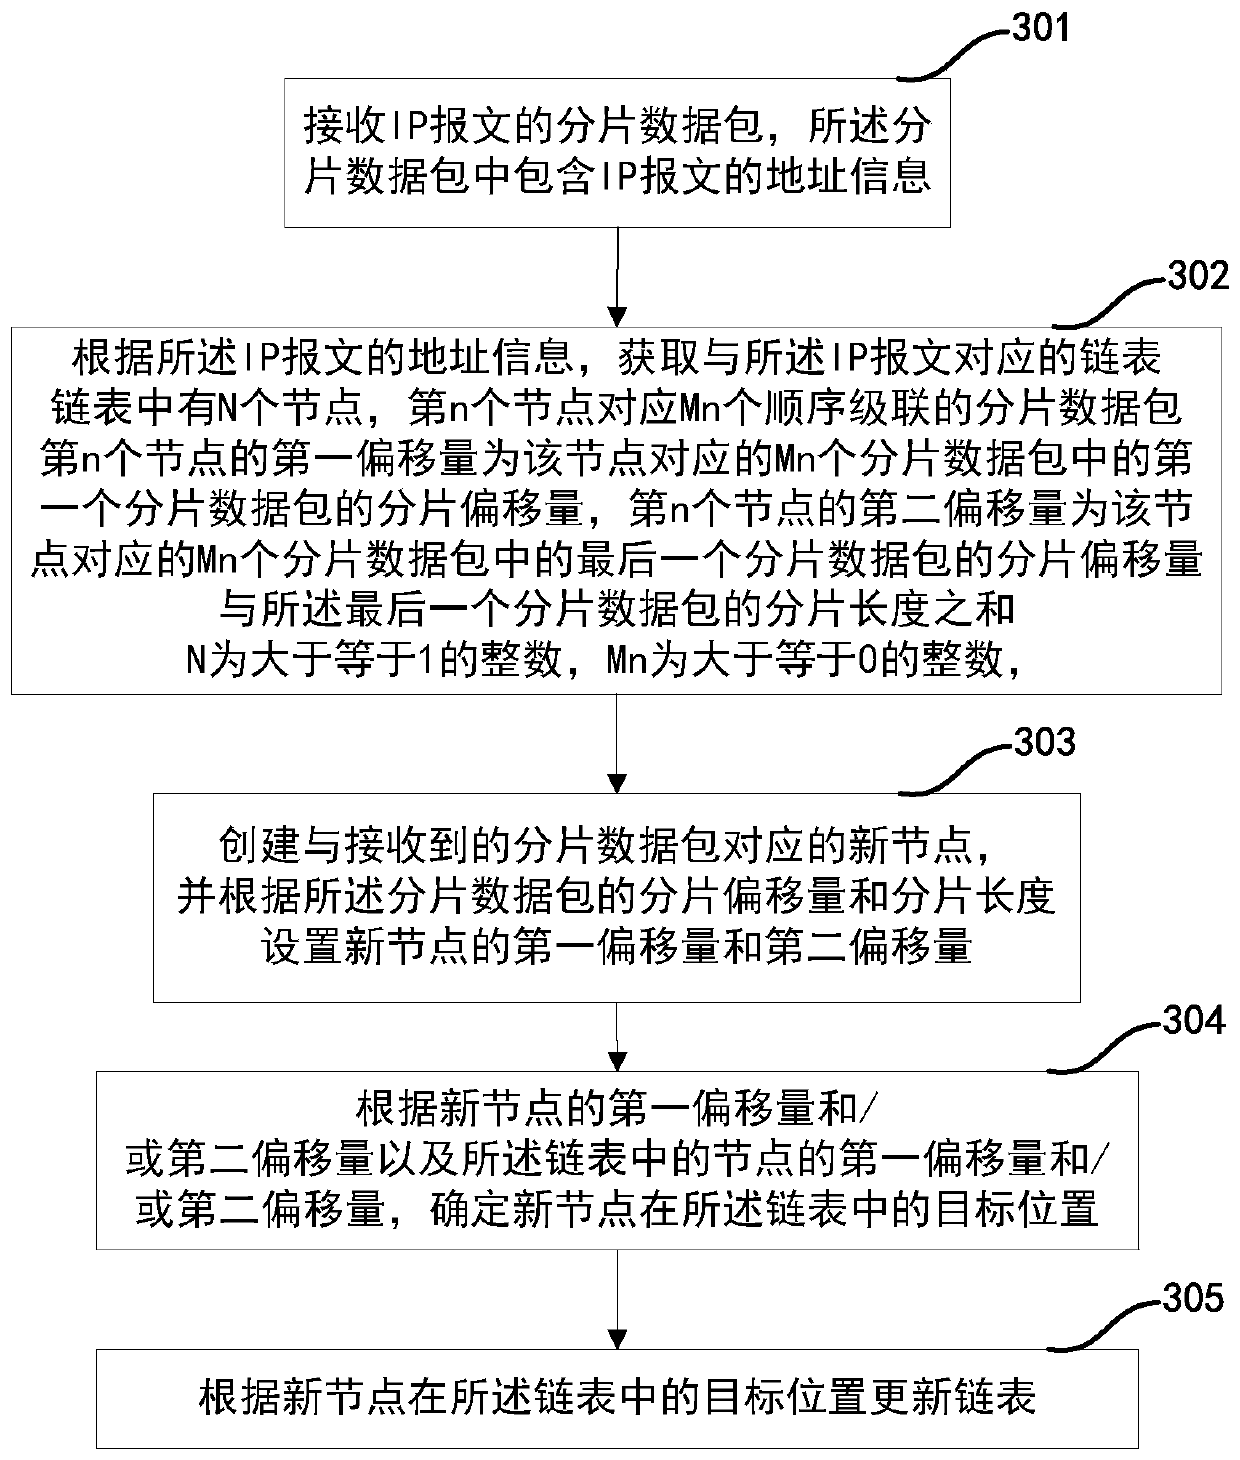 Fragmented data packet processing method and device